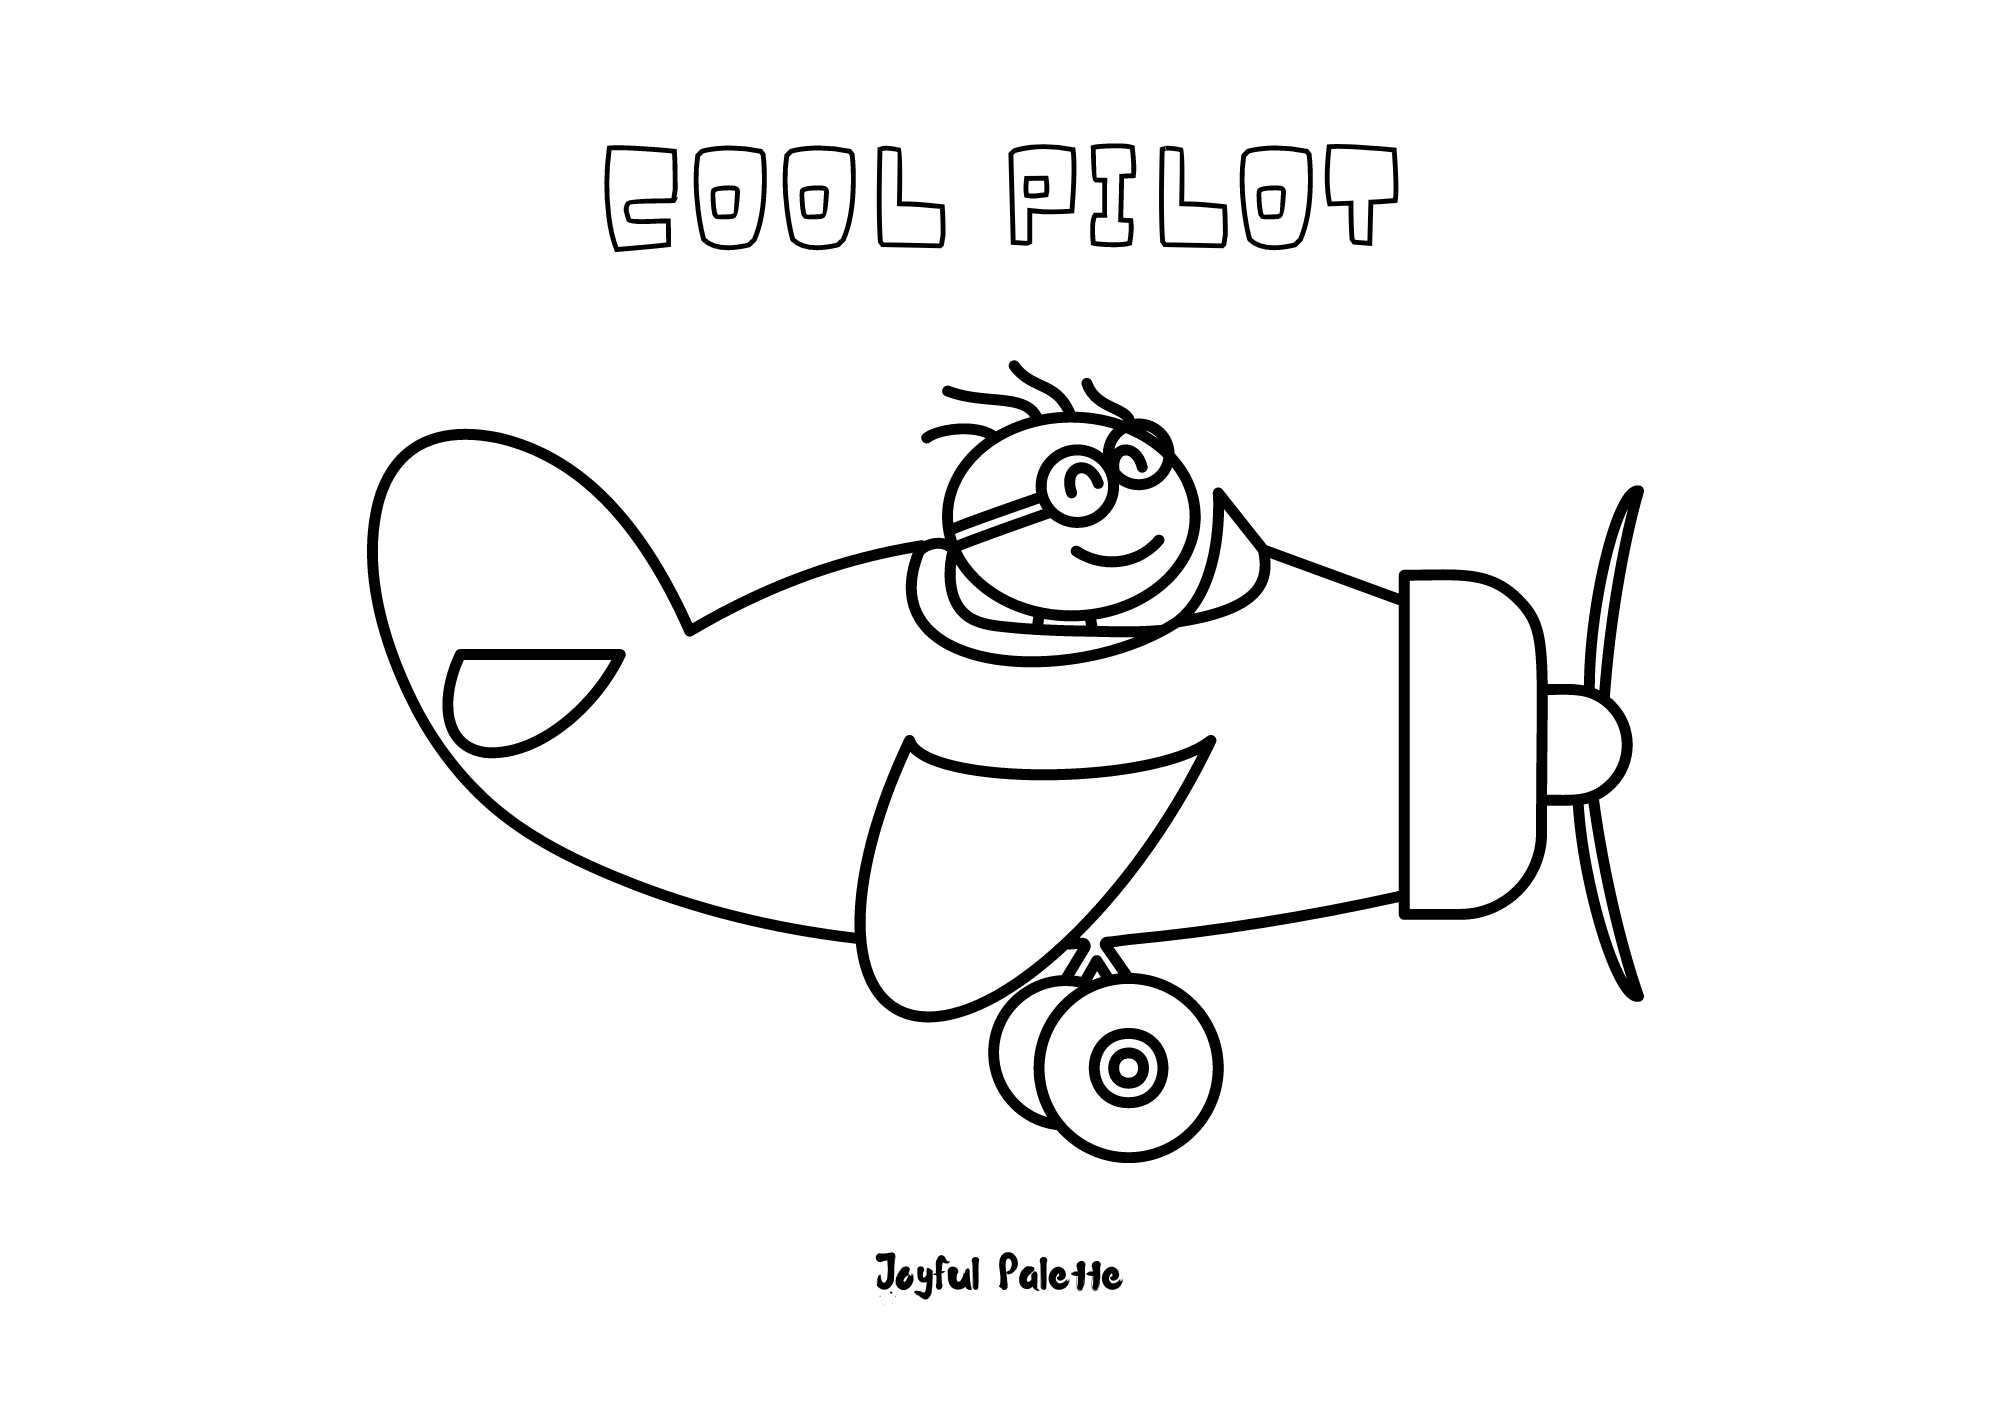 Cool Pilot Coloring Page